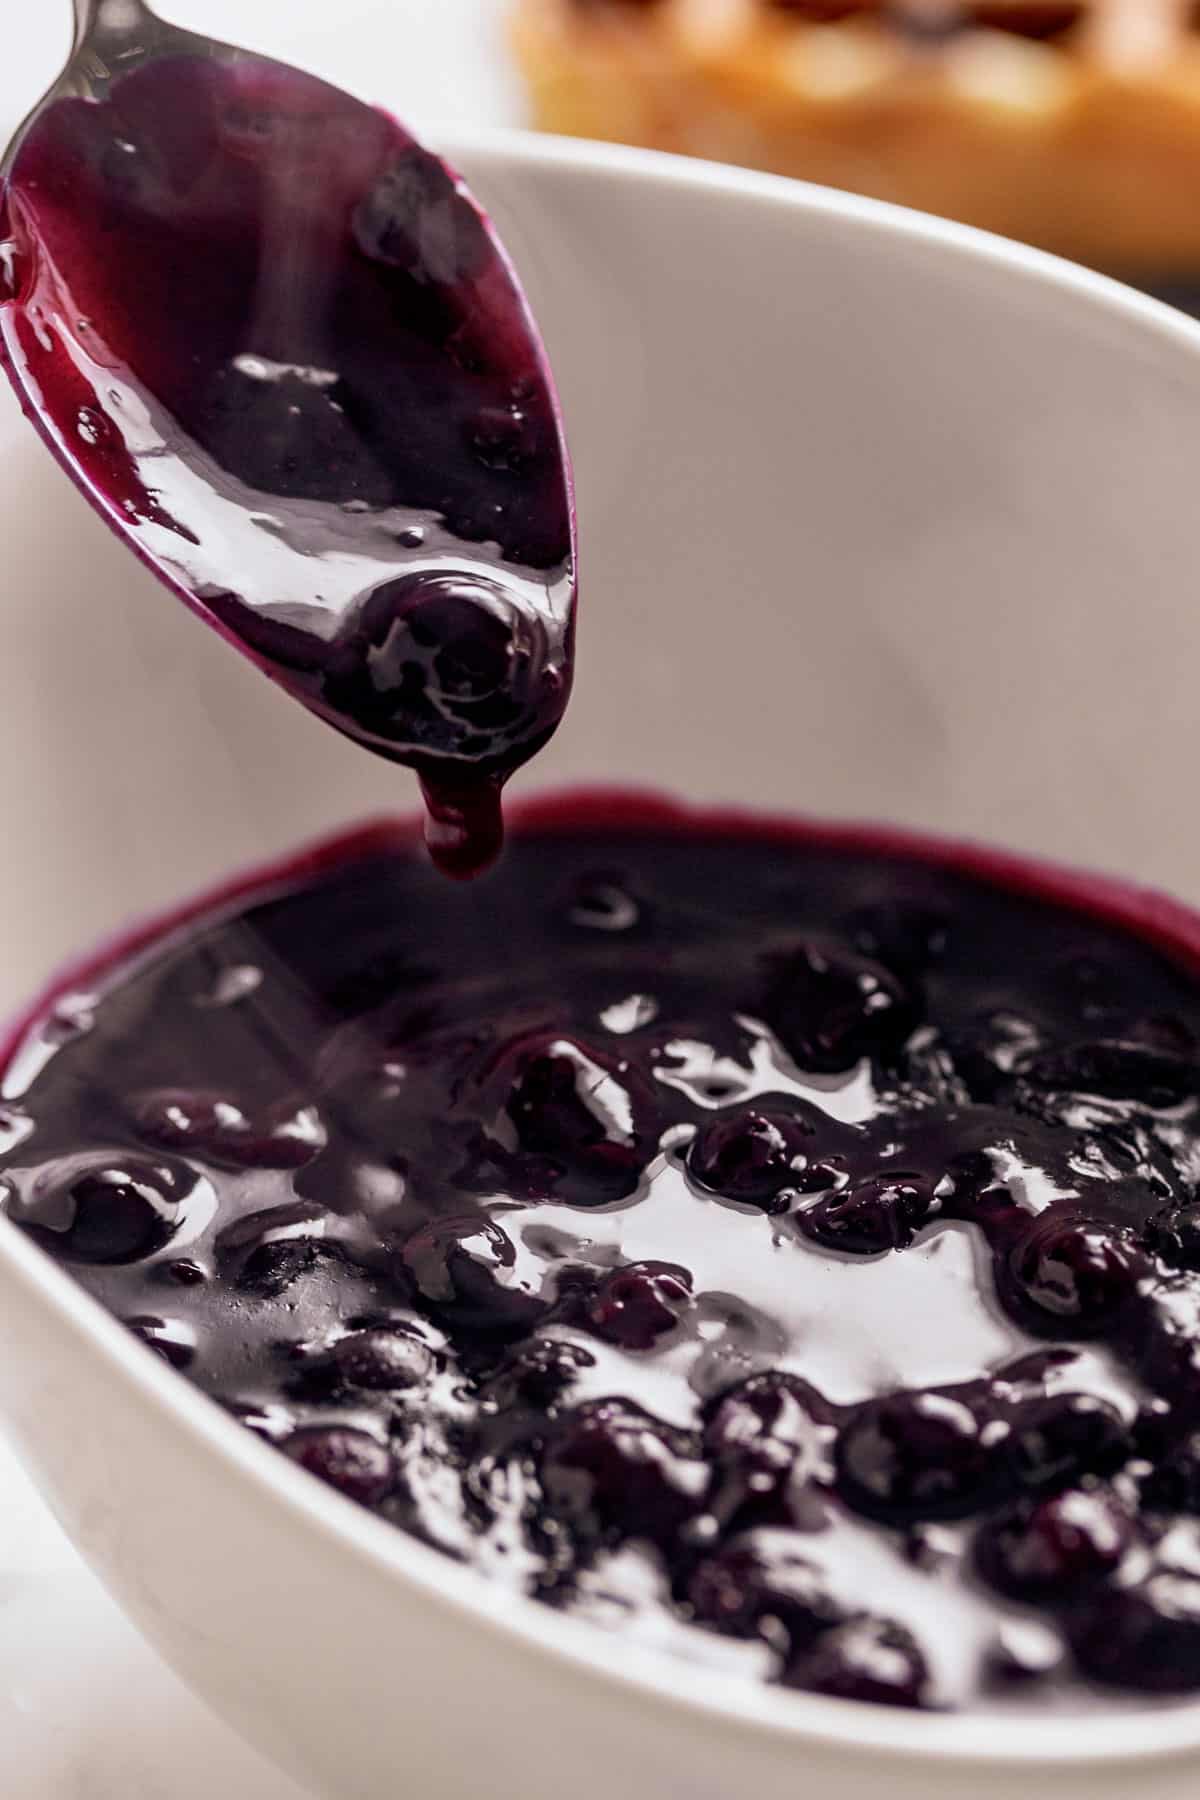 Blueberry Sauce served in a white bowl with a metal spoon | craveitall.com